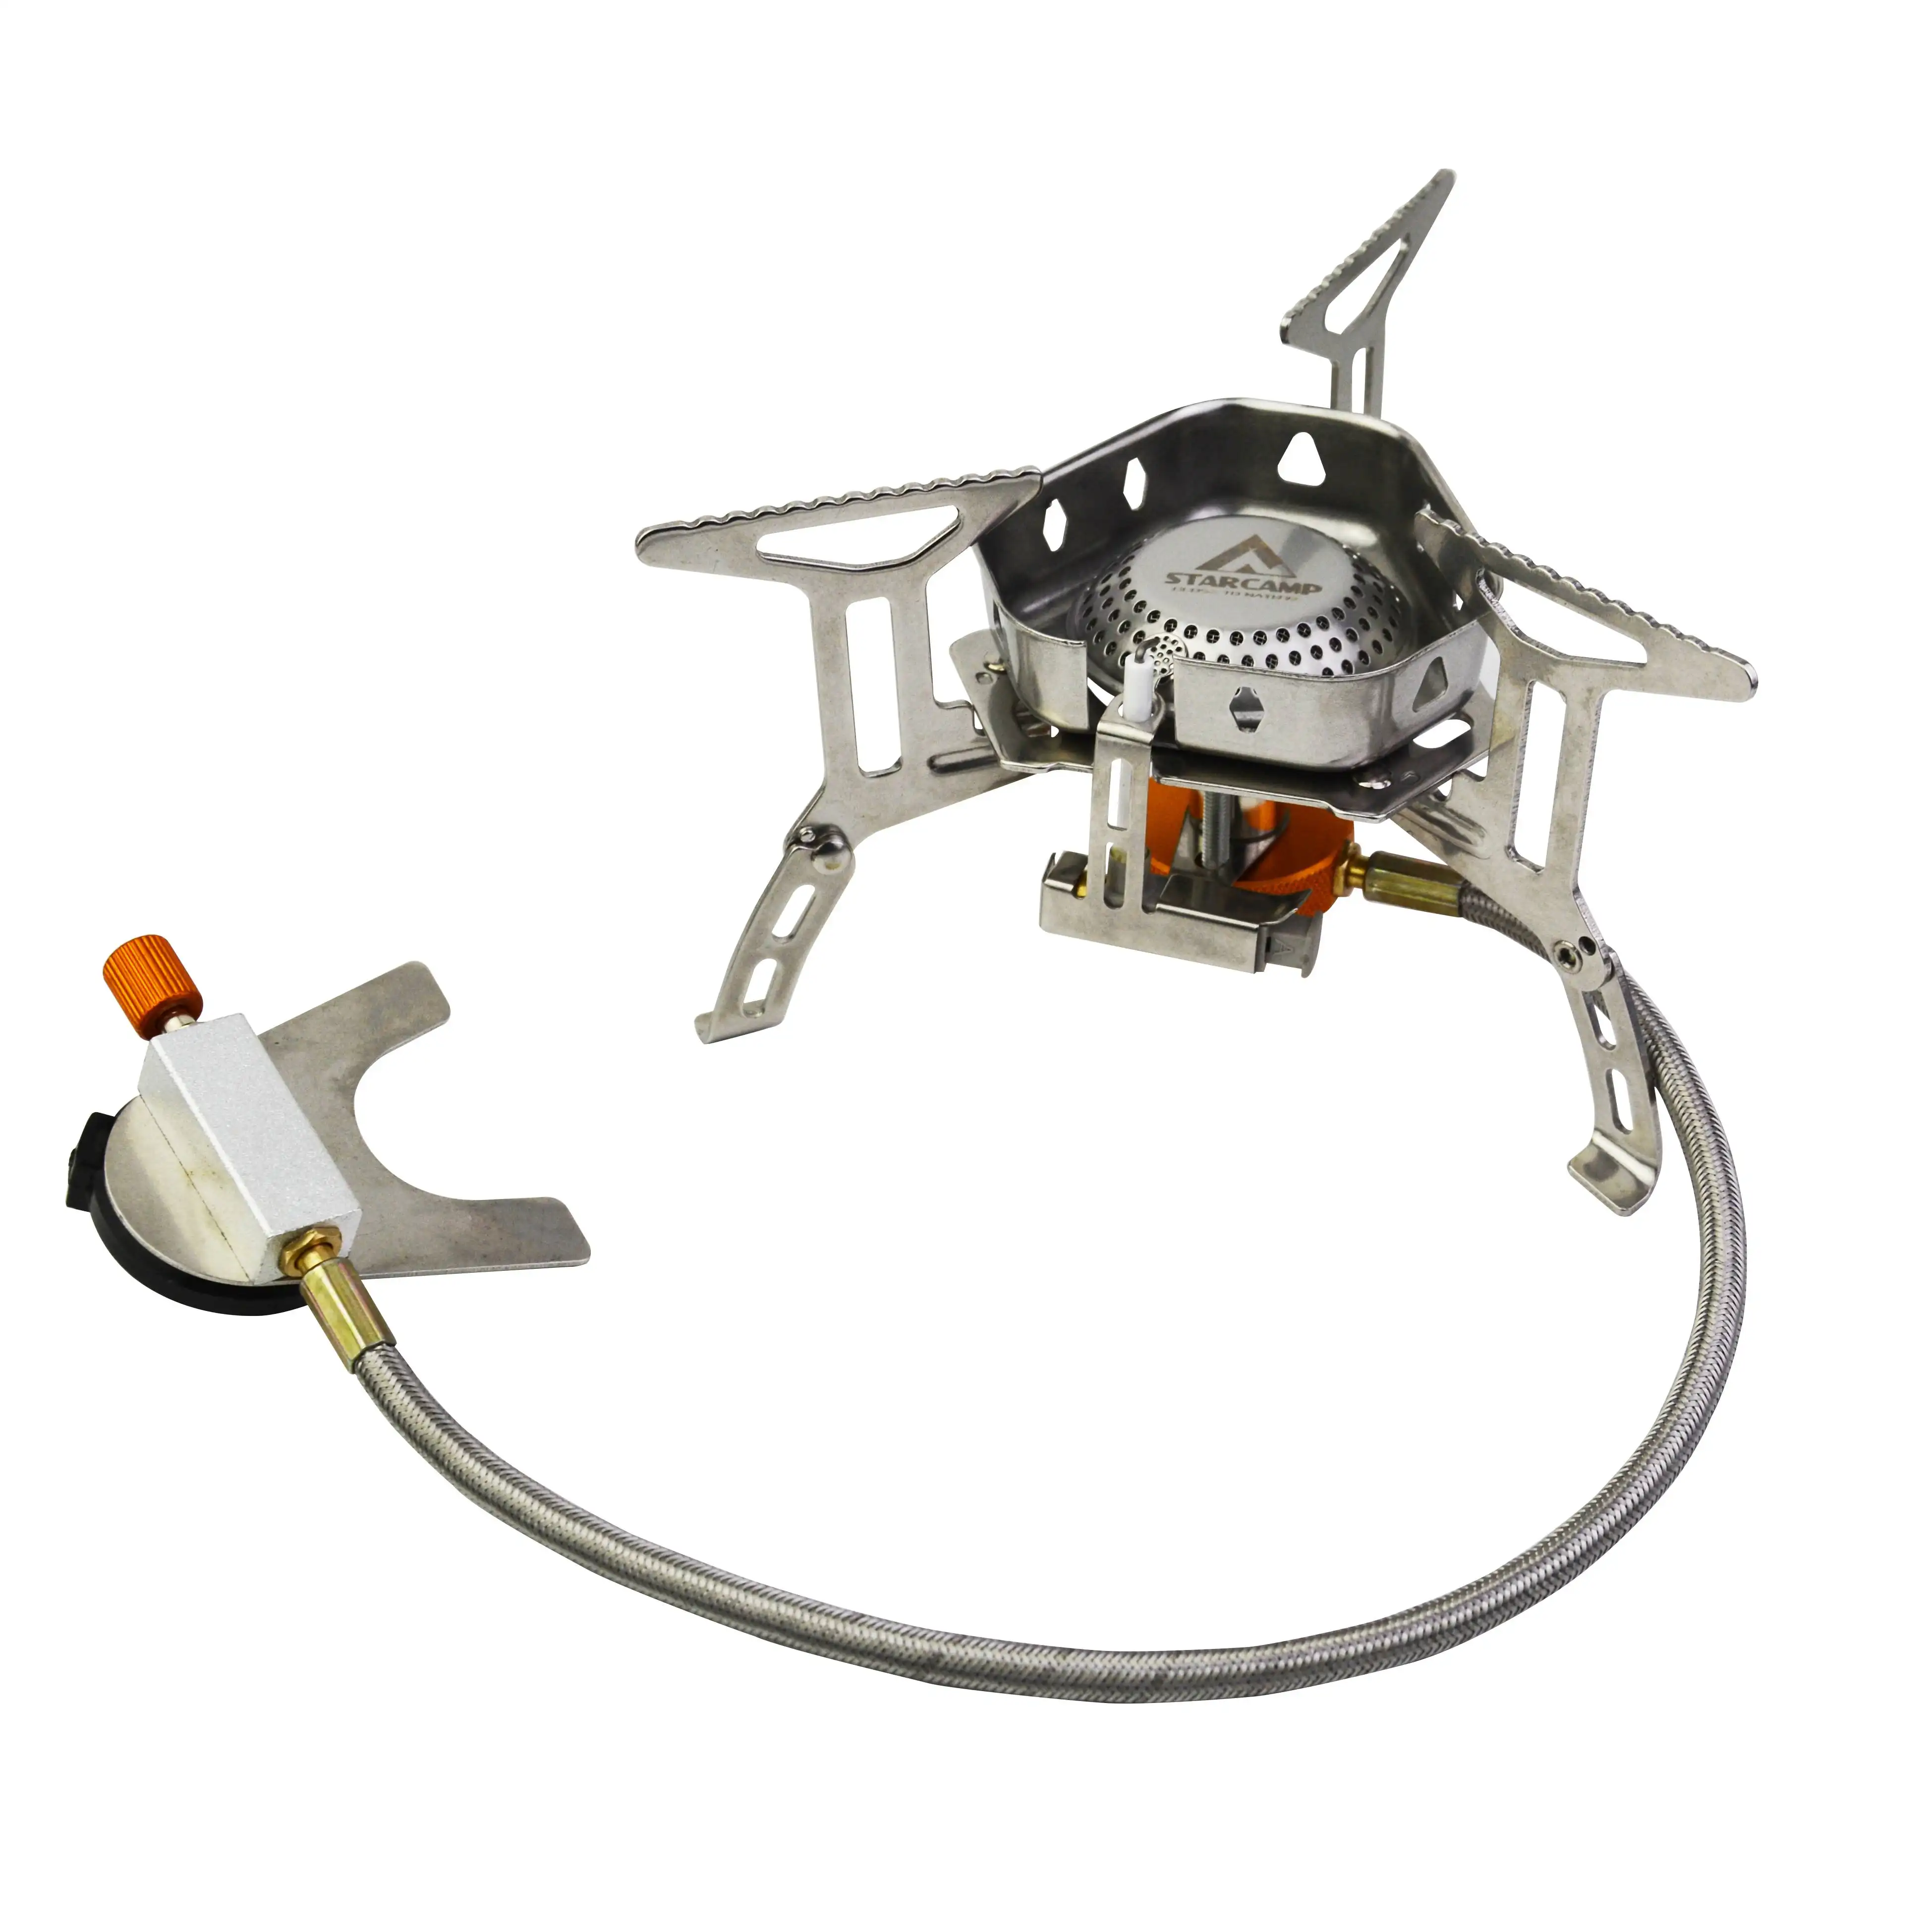 StarCamp Outdoor Solo Backpack Hiking Camping Butane Gas Stove Portable Gas Burner